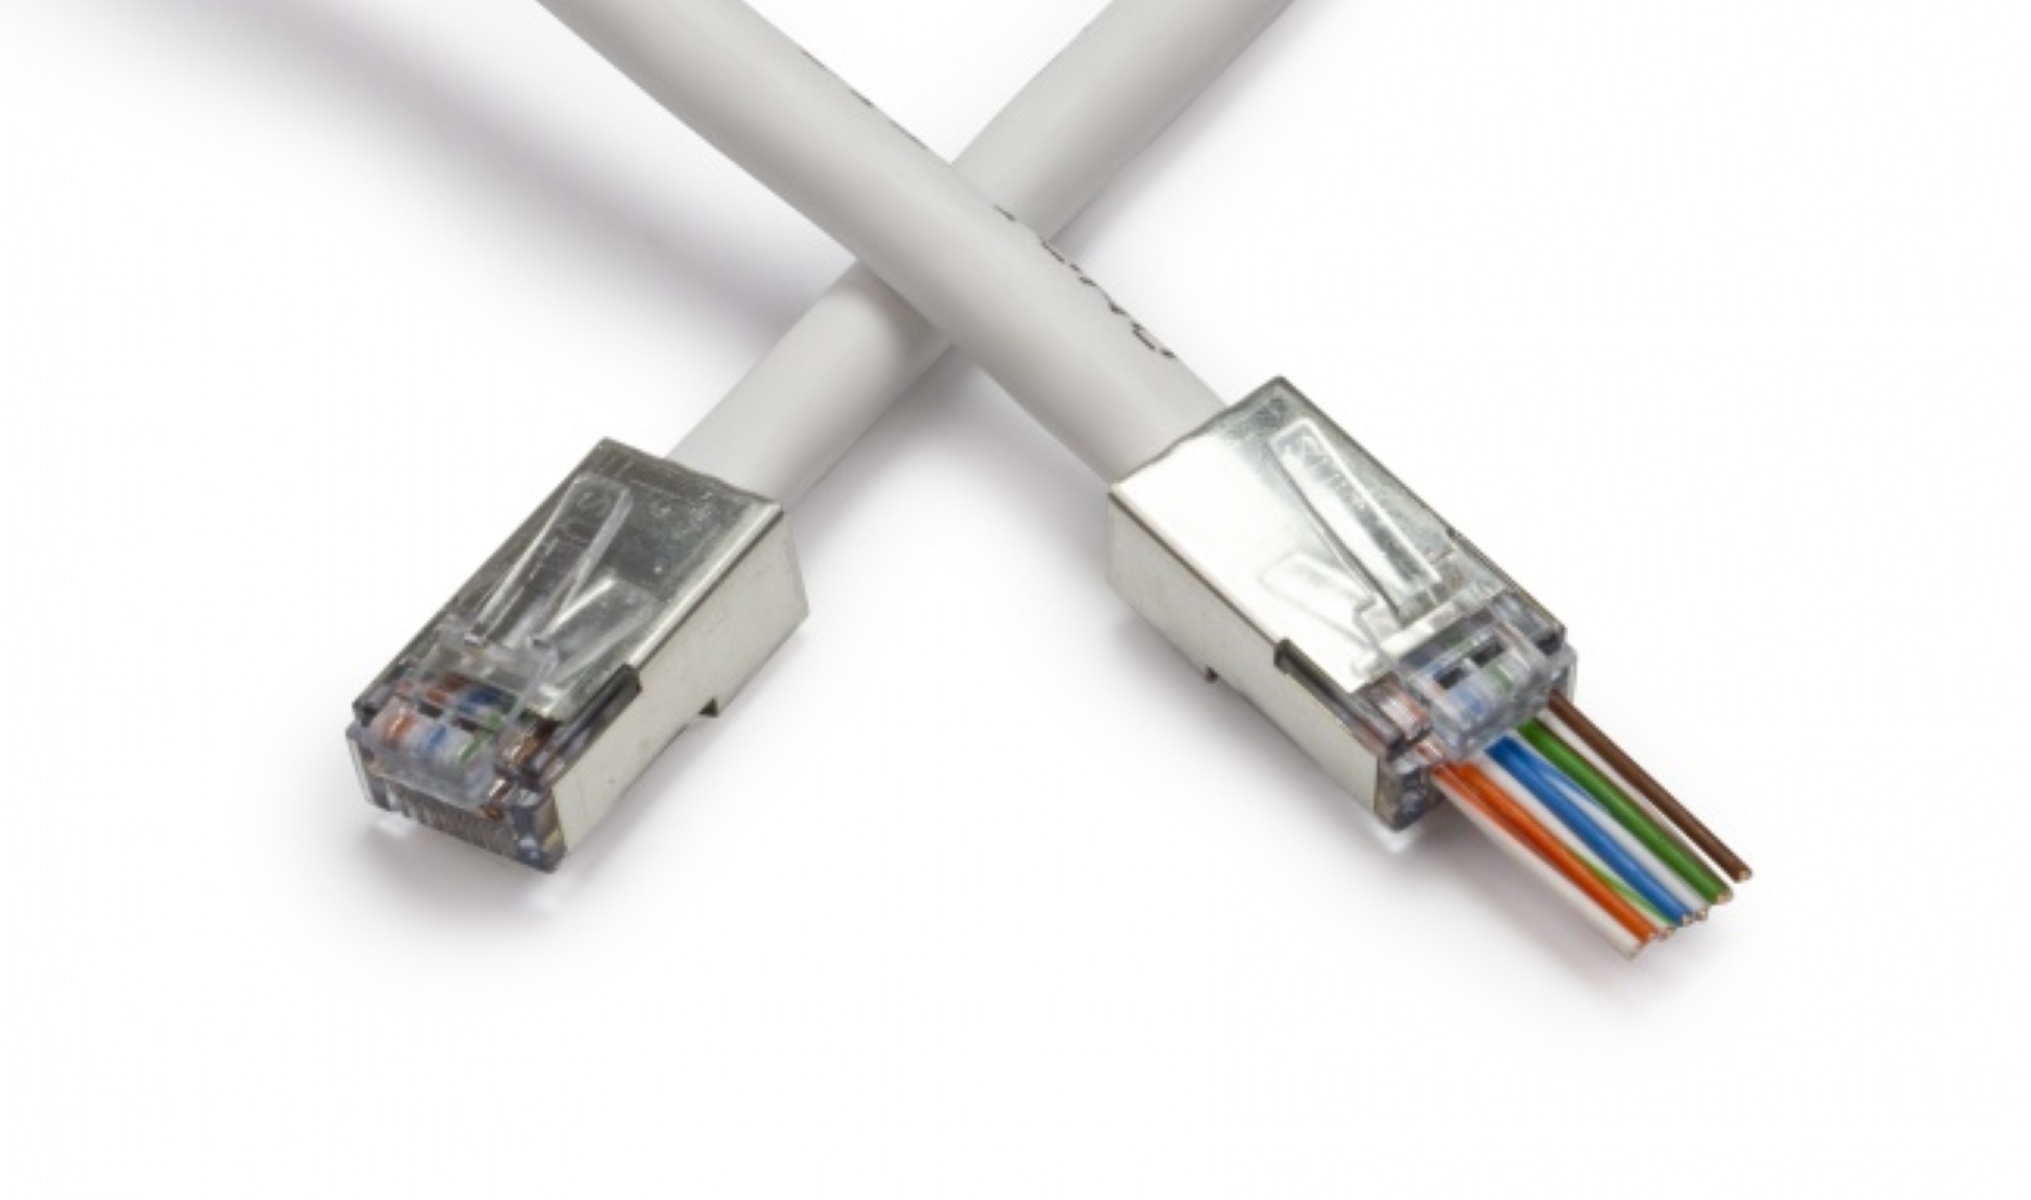 a-fast-ethernet-connection-utilizes-what-pins-on-an-rj-45-plug